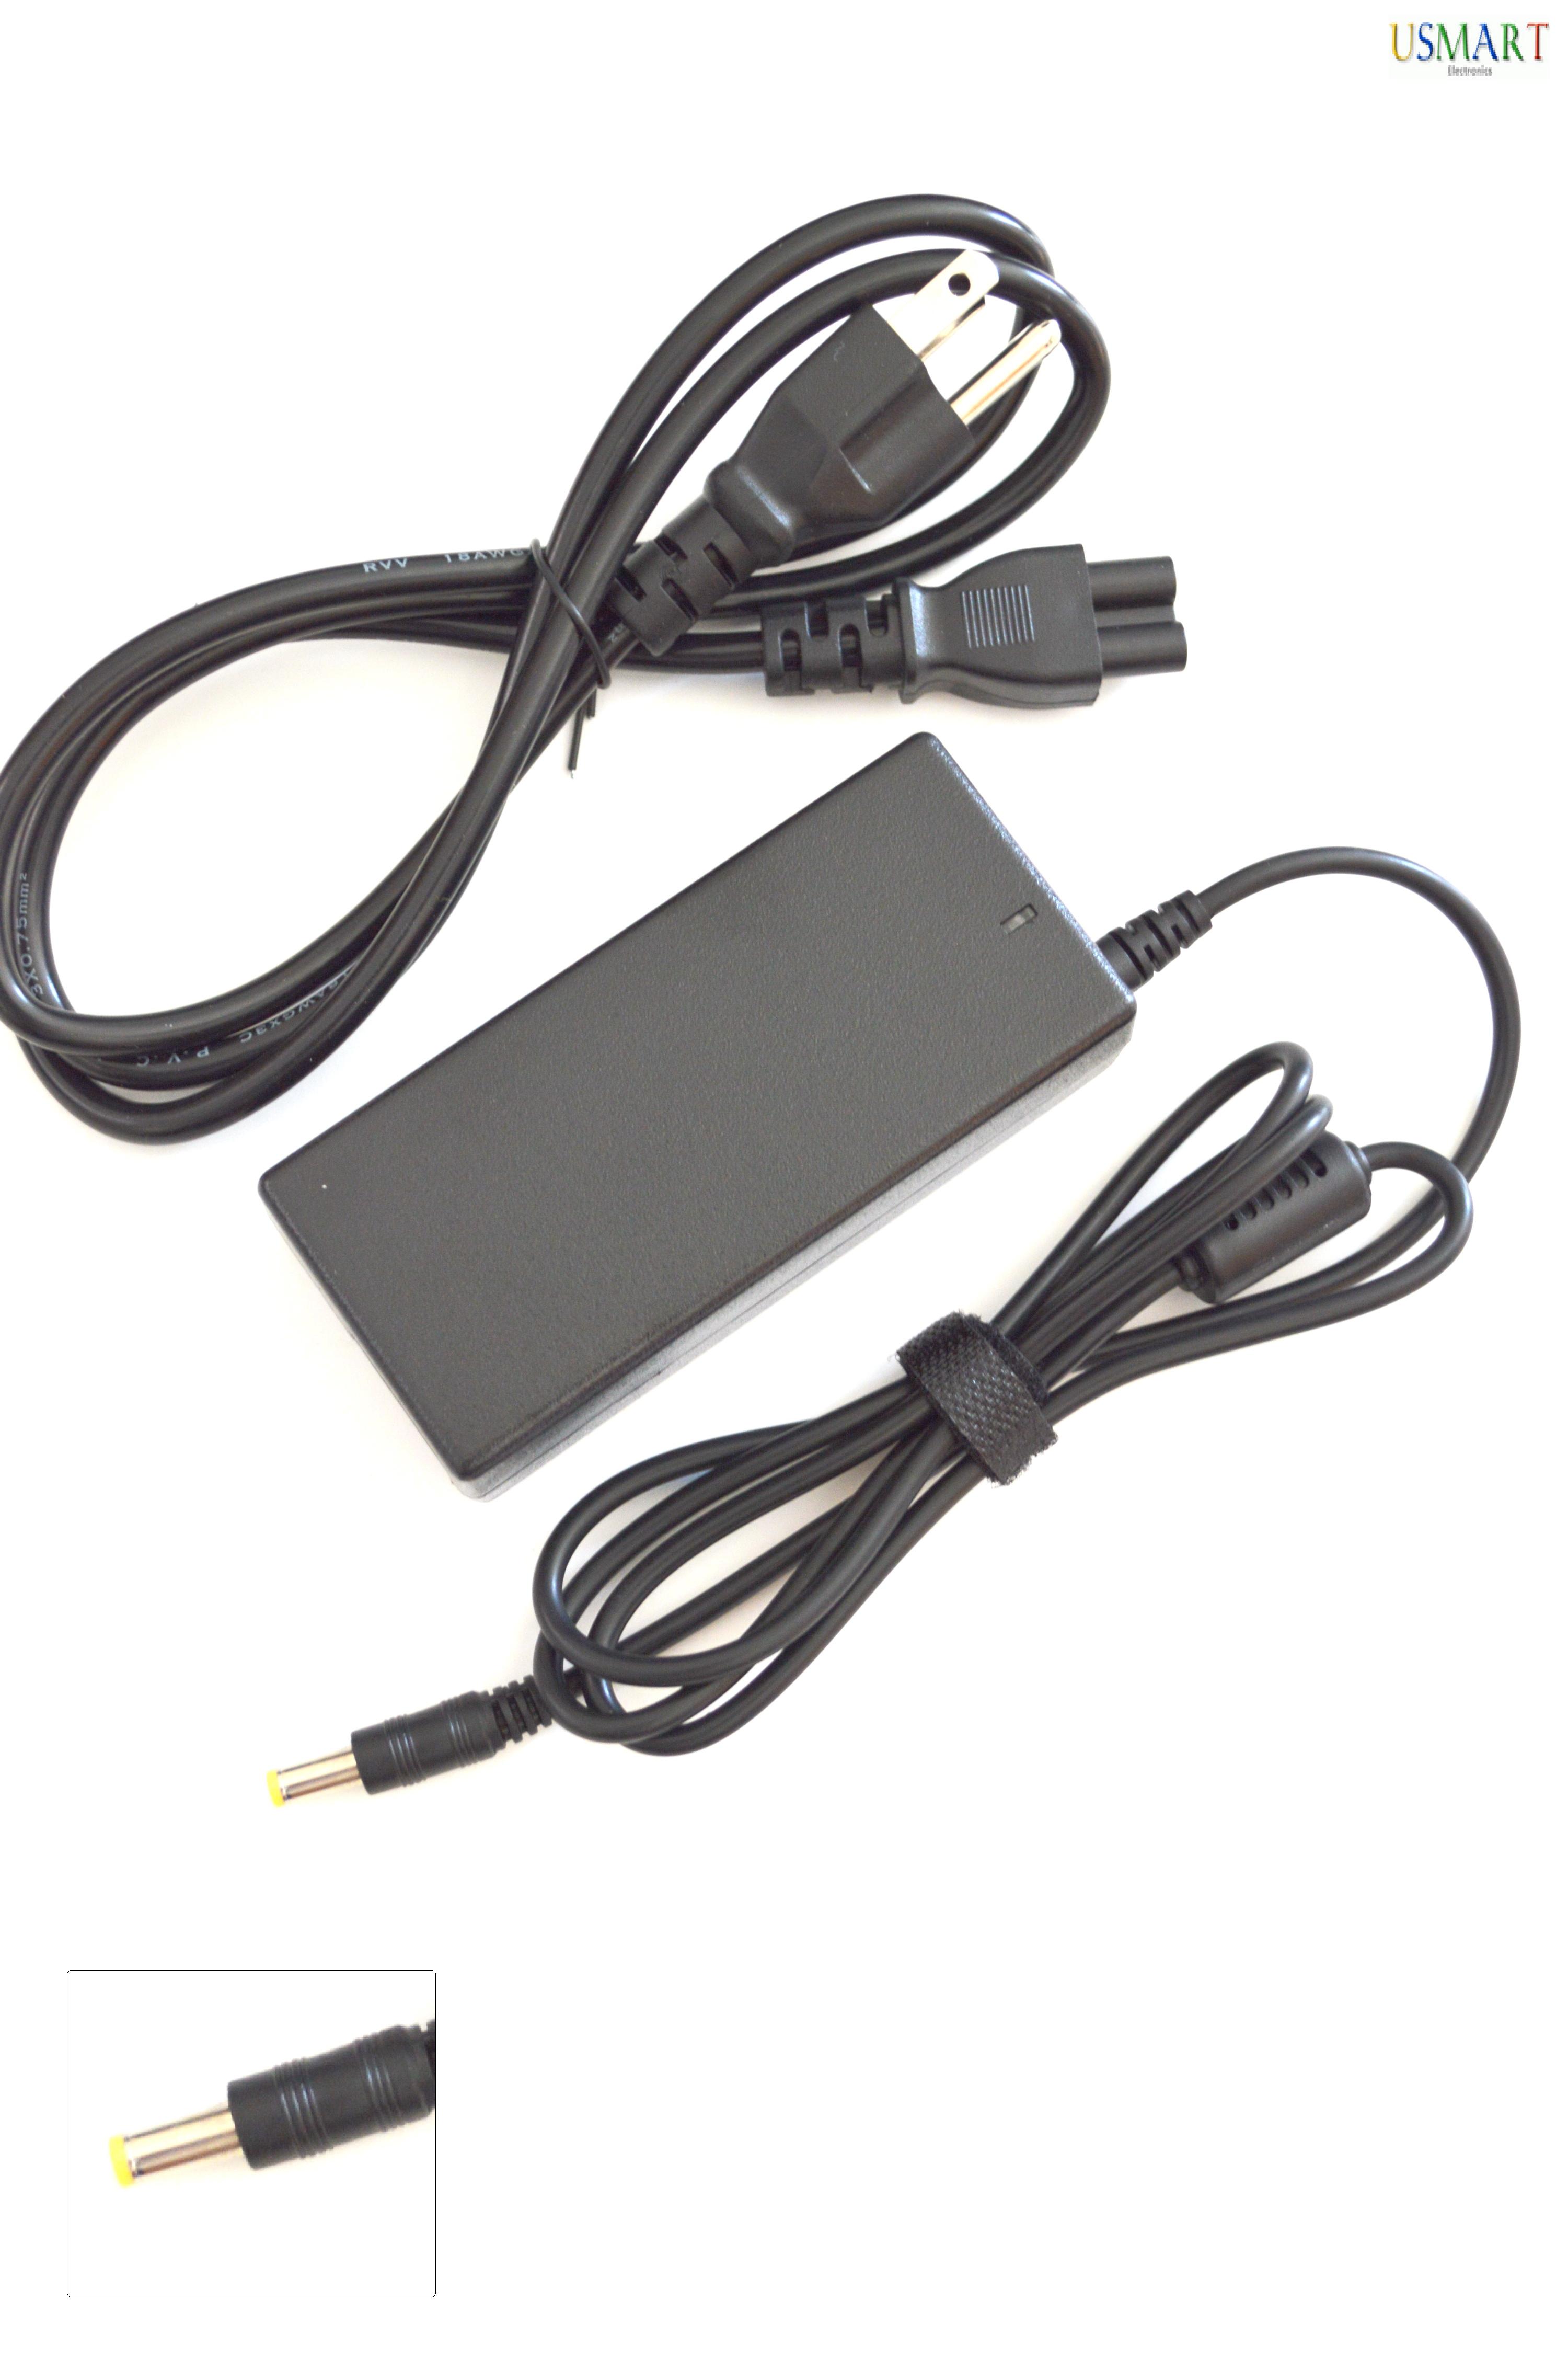 Ac Adapter Laptop Charger for Acer Aspire One 522 522-BZ465 522-BZ824 522-BZ897 Acer Aspire One 521 521-3089 521-3530 521-3782 A150-1649 Acer Aspire One 10.1 Inch Acer Aspire One - image 1 of 4